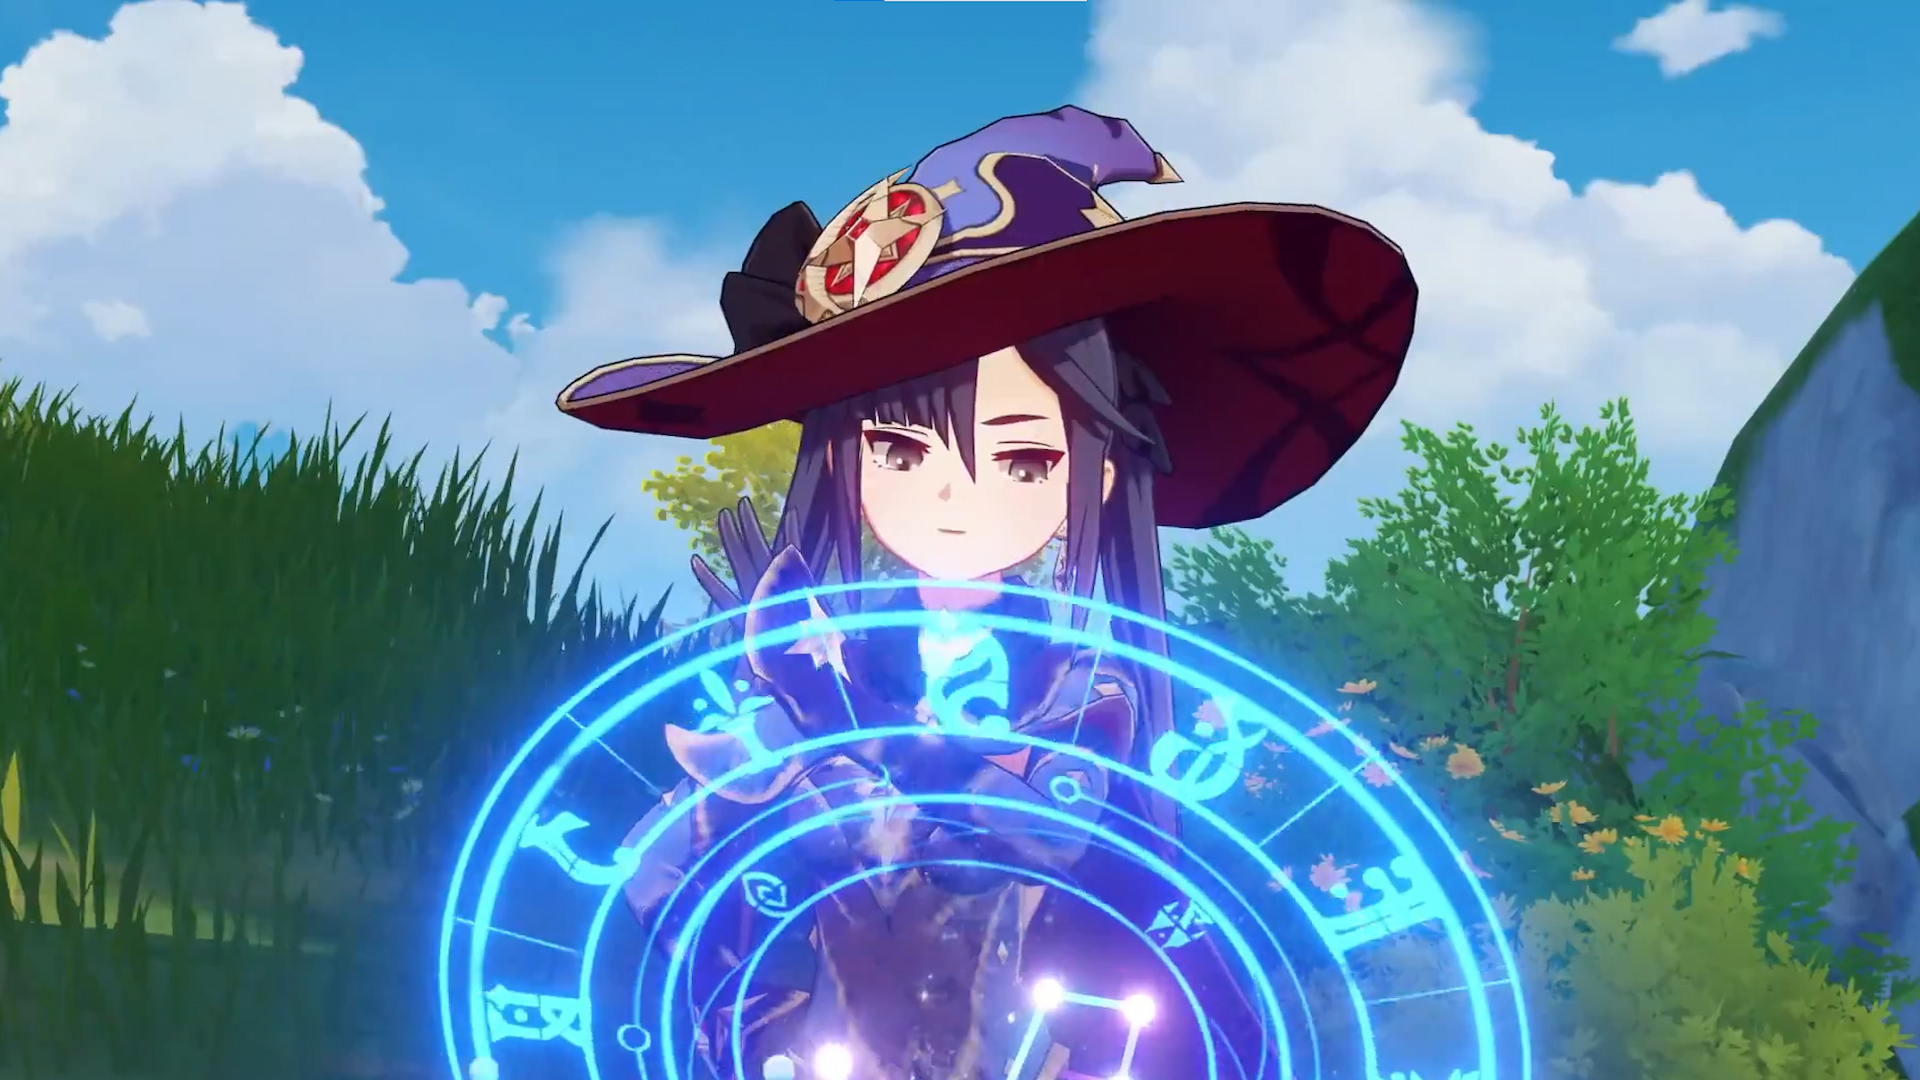 Genshin Impact fix nerfs Mika charged attack and fans are not pleased: anime girl with big hat looking at magic circle